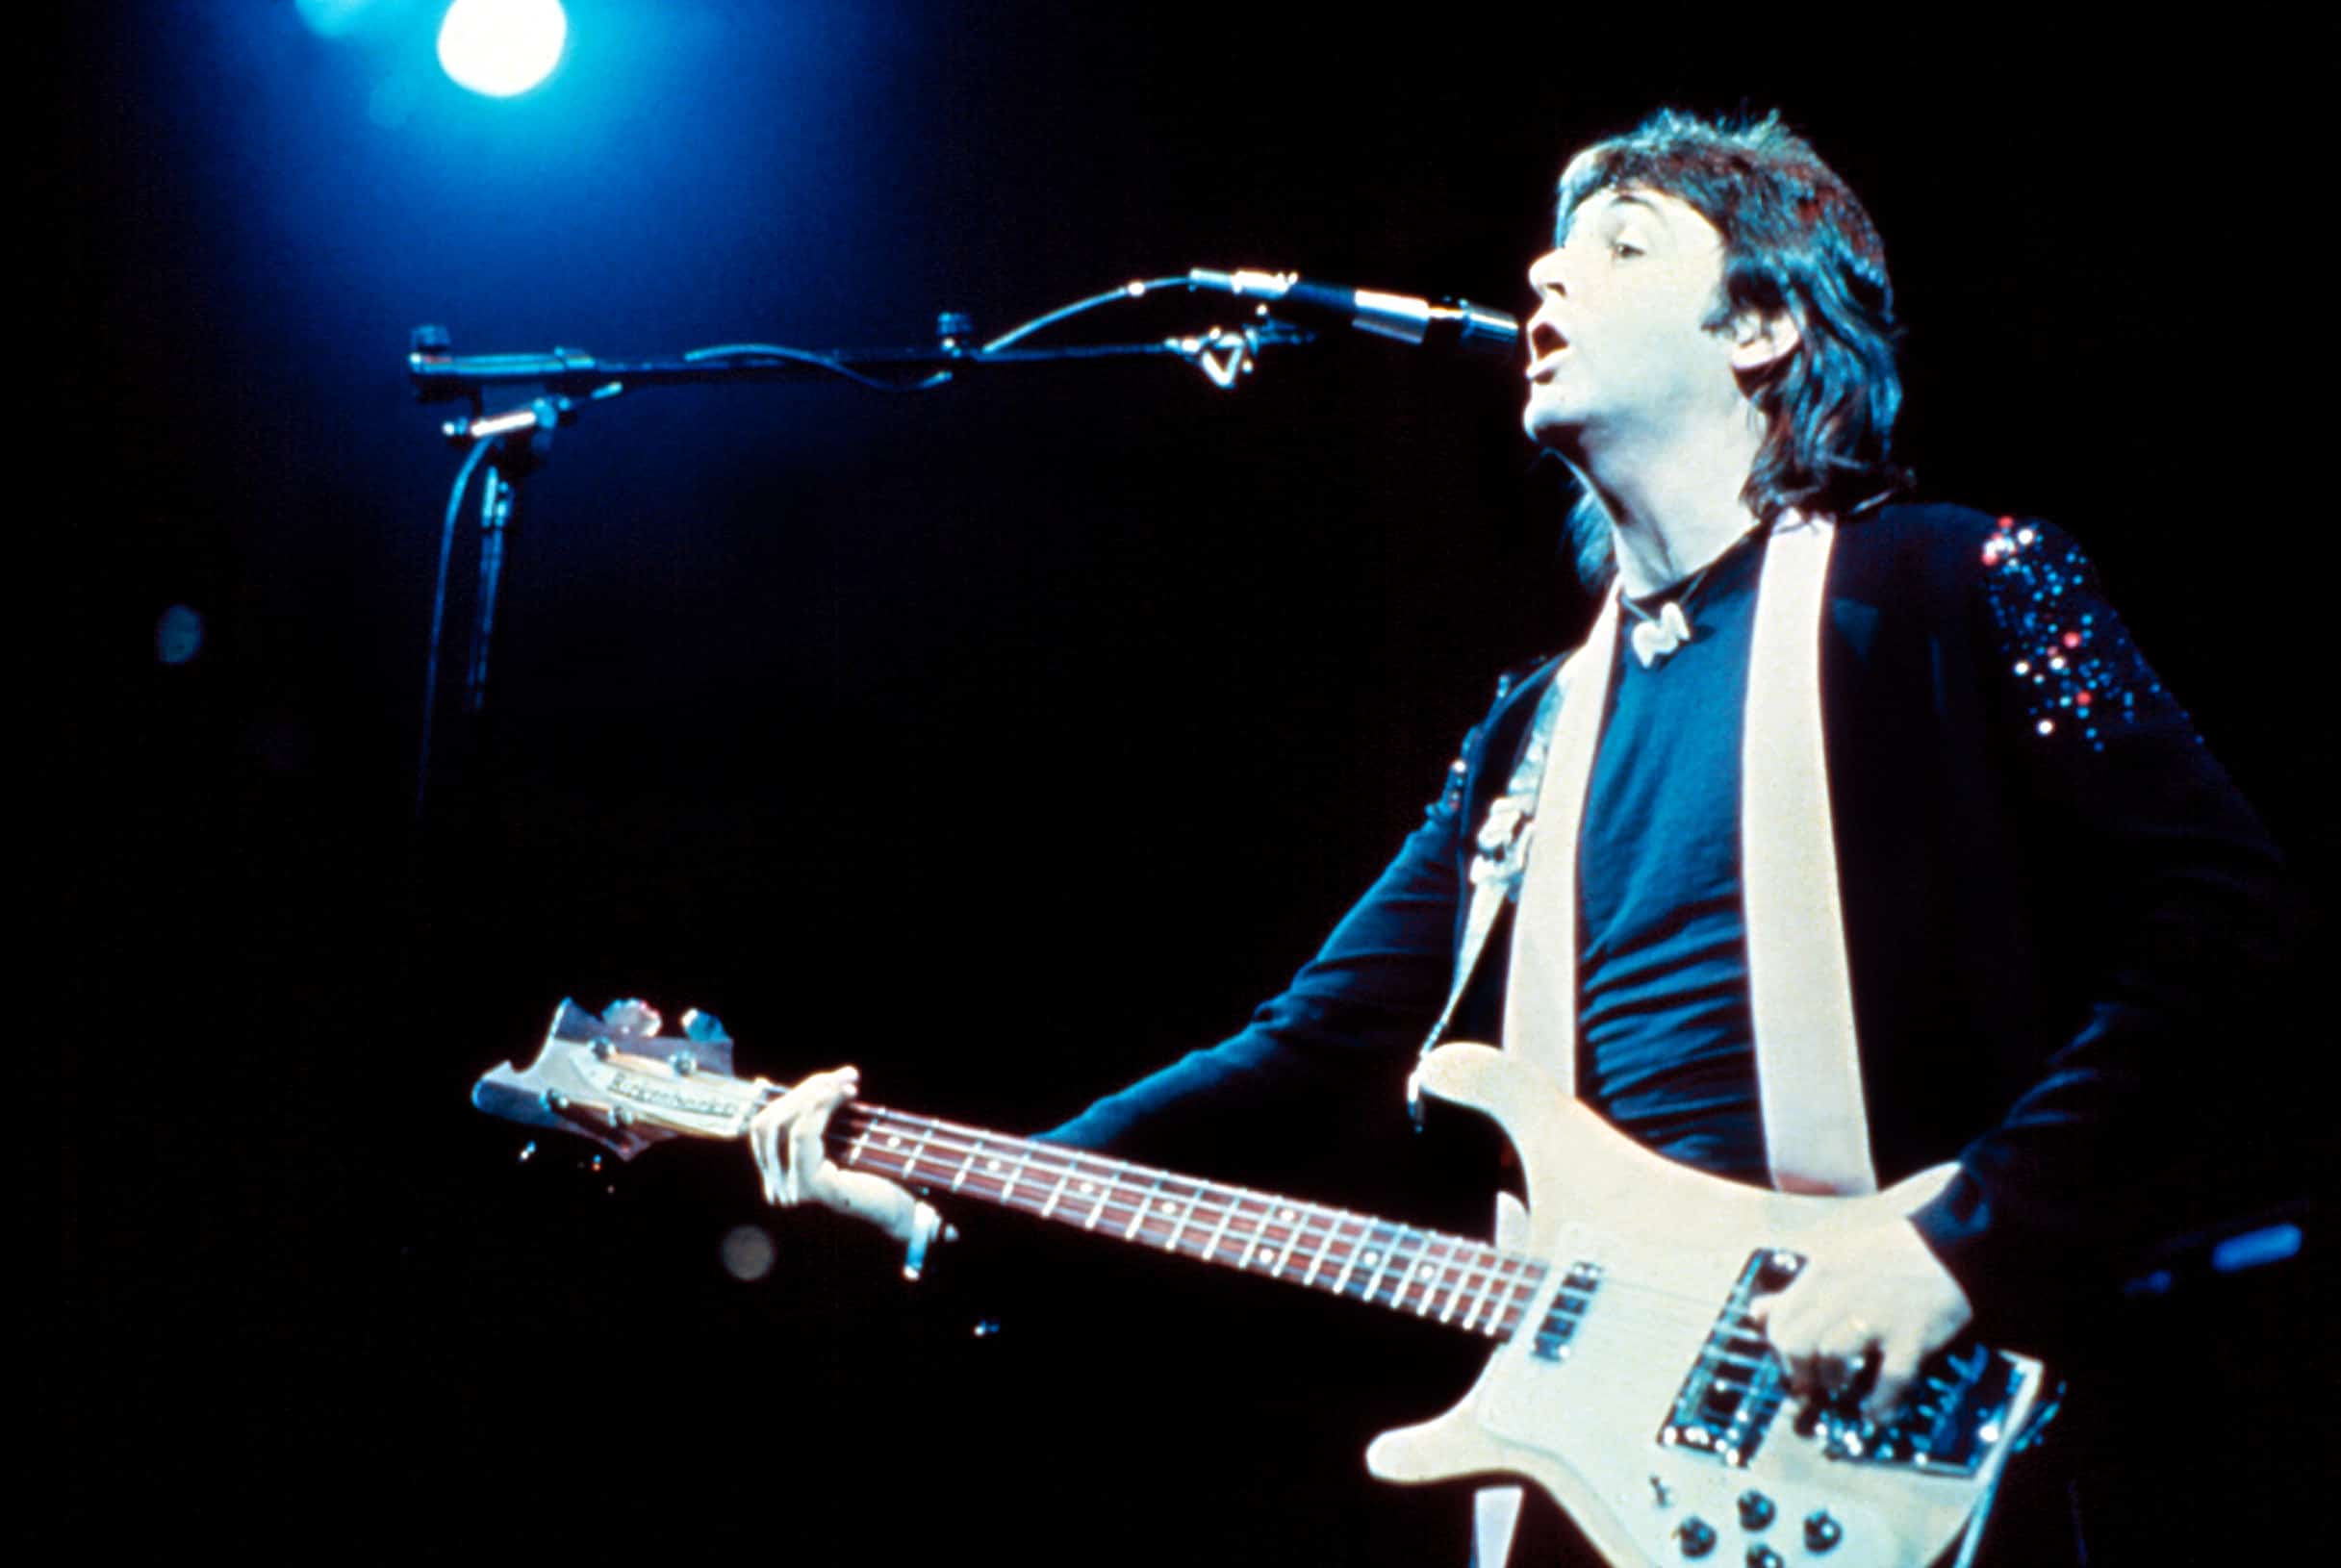 Paul McCartney performing on 1976 Wings Tour of the U.S. 